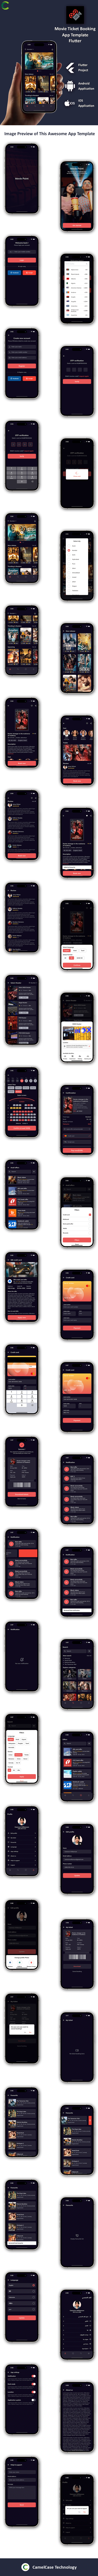 Movie Ticket Booking App Template in Flutter | BookMyShow Clone | Multi Language - 7